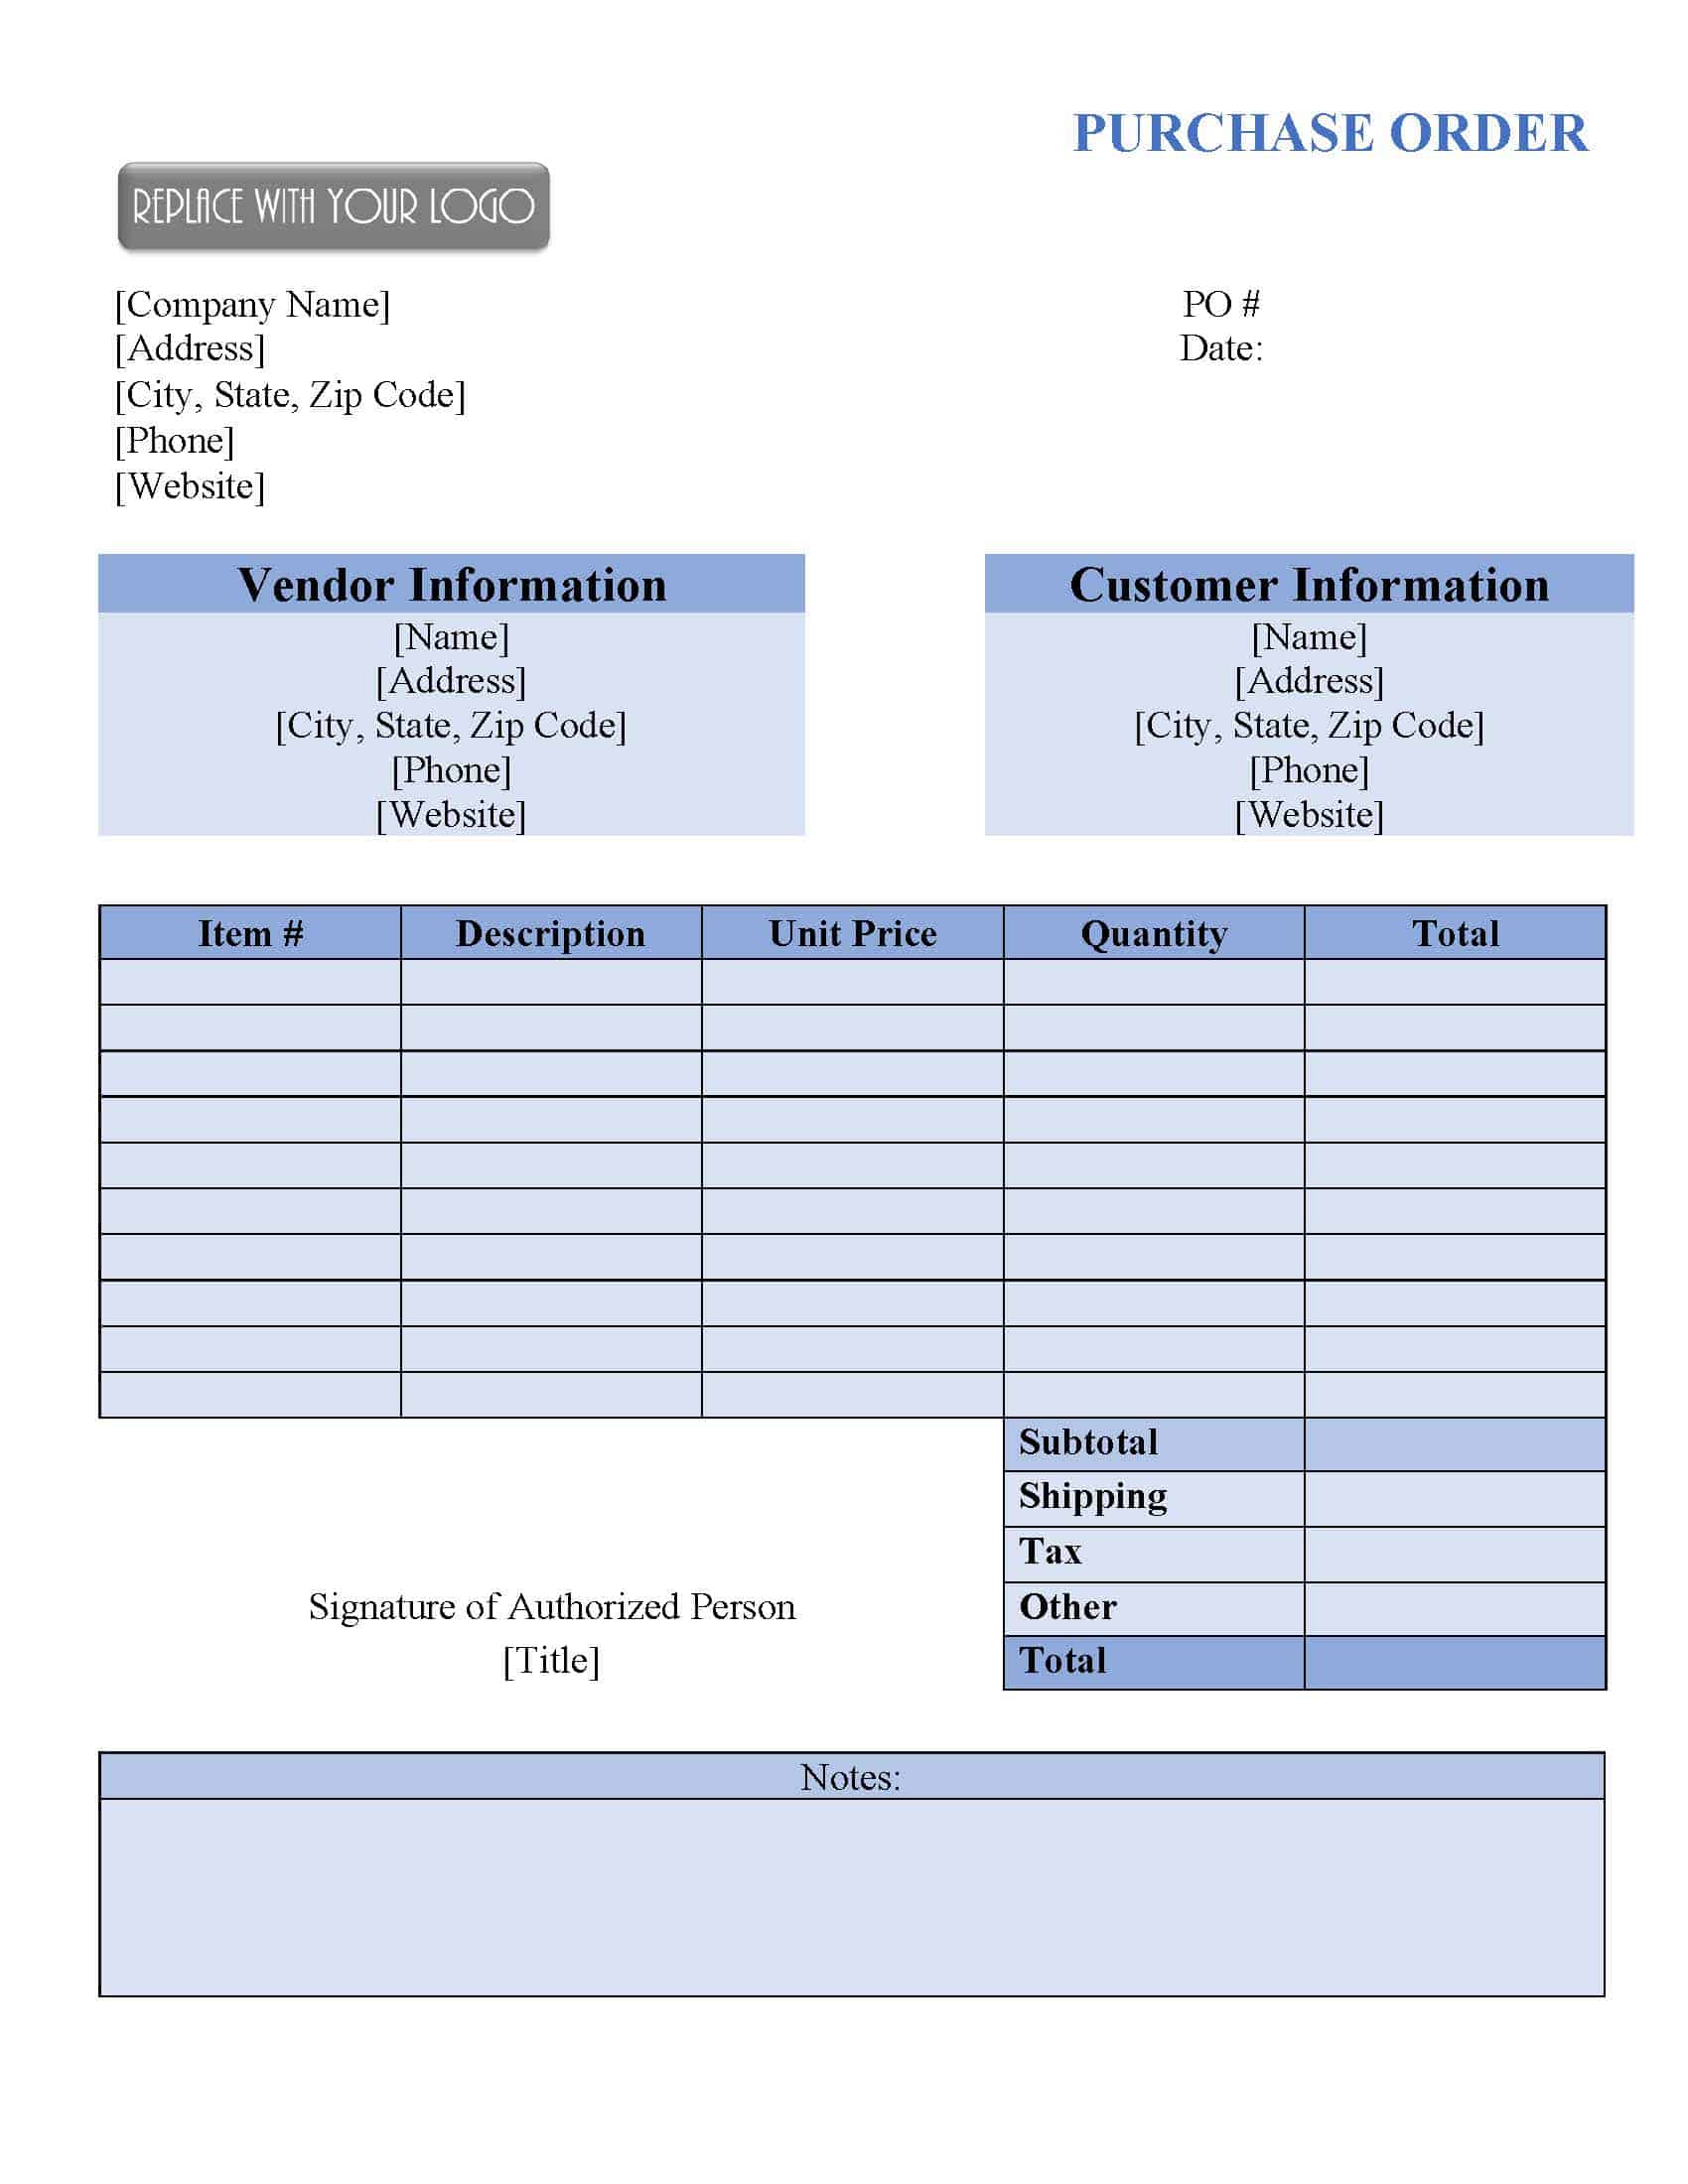 purchase-order-purchase-order-template-for-excel-riset